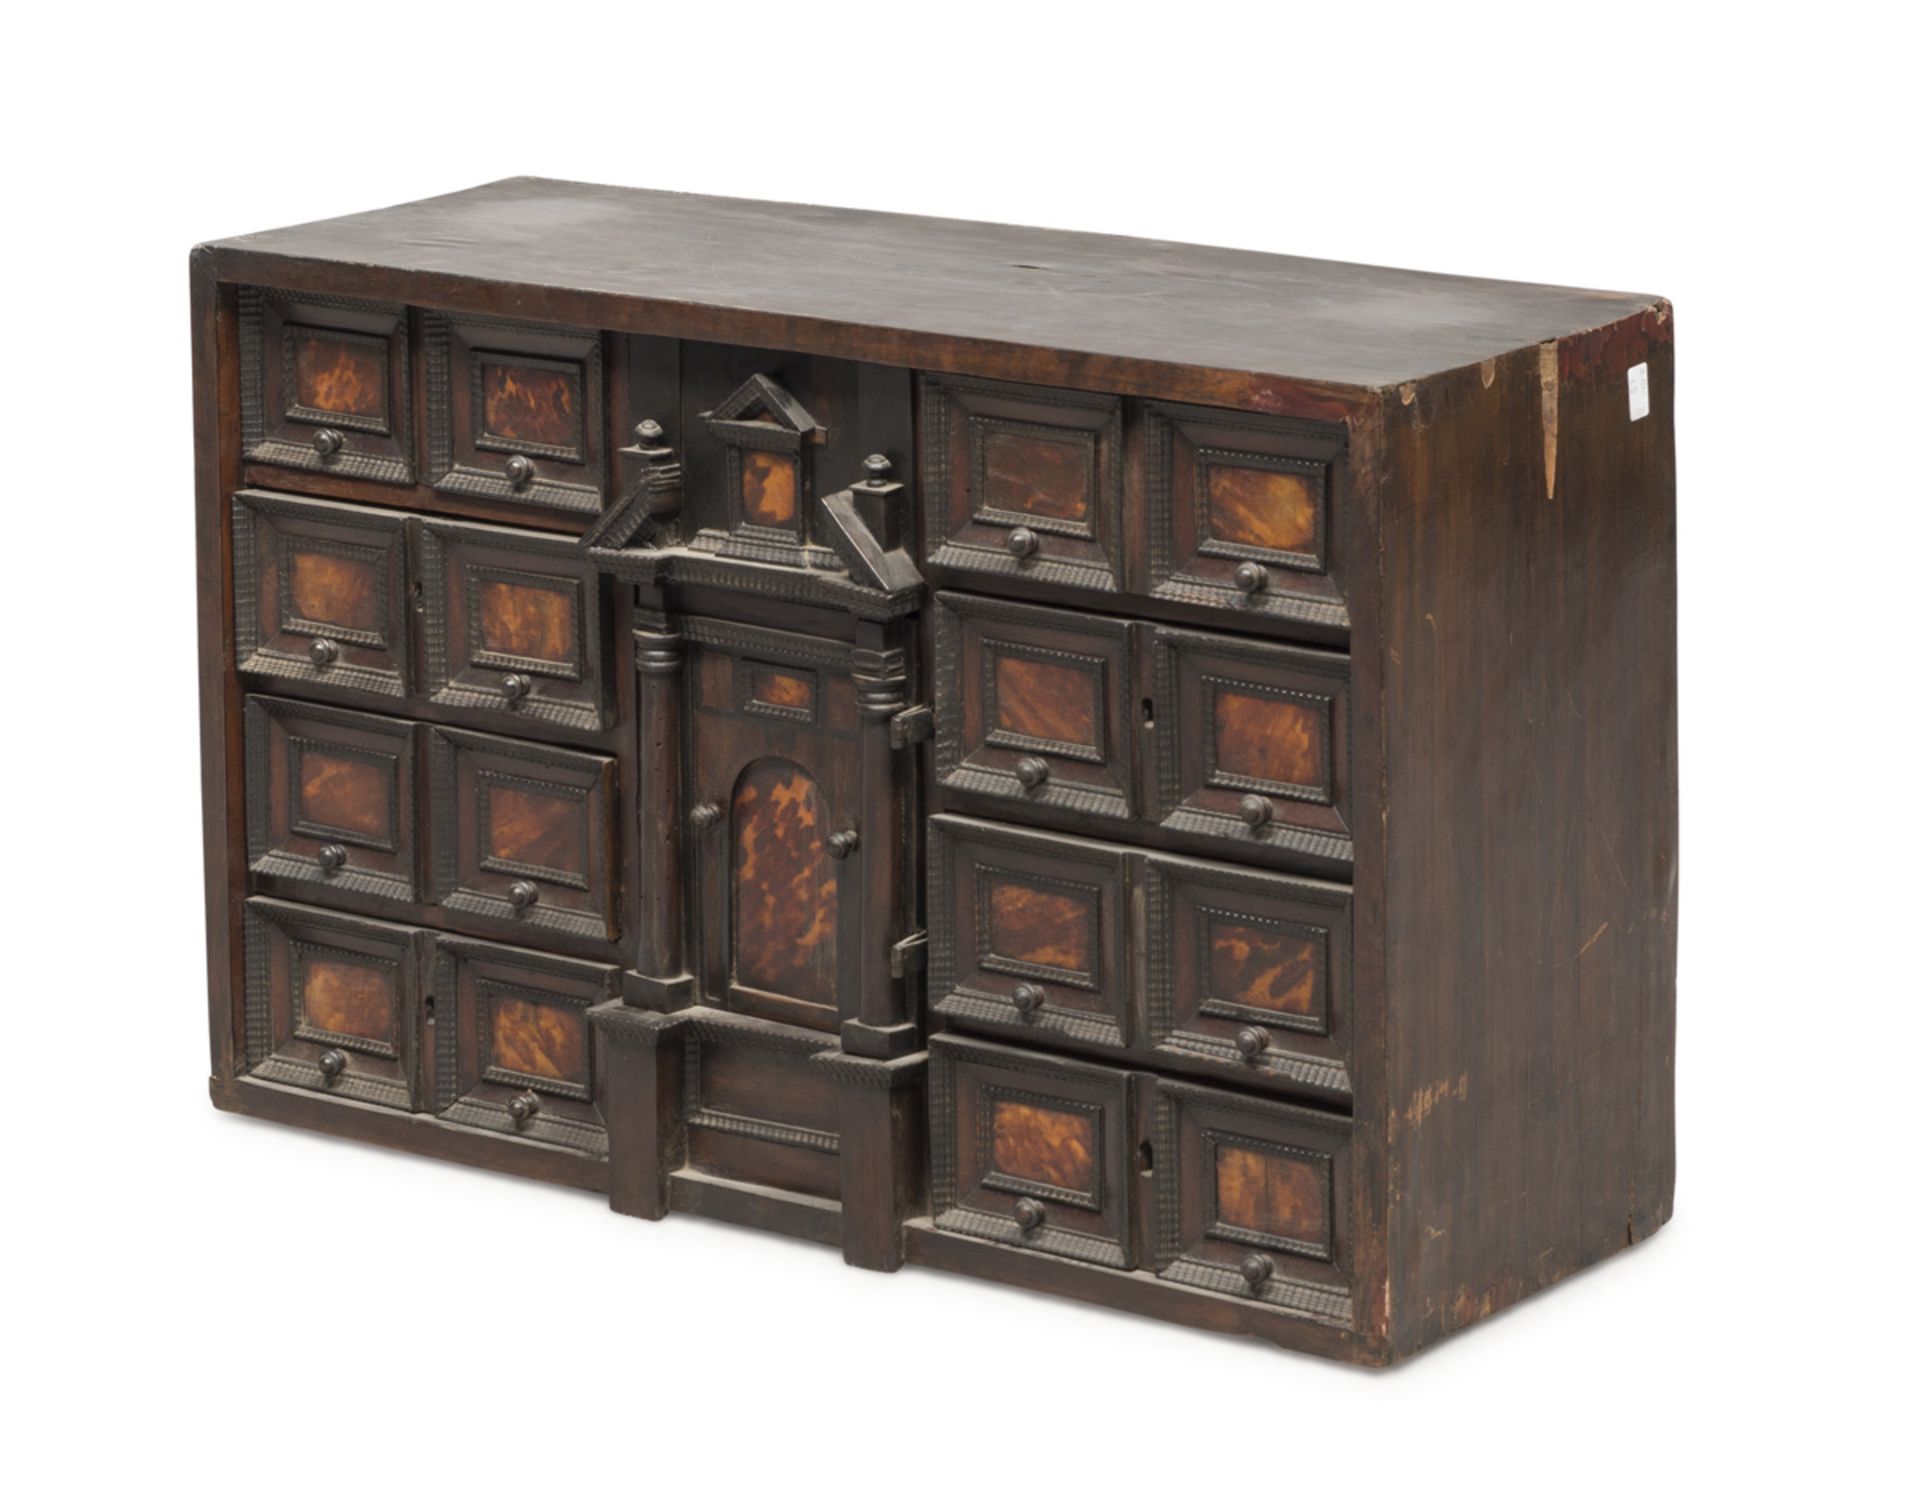 BEAUTIFUL COIN CABINET IN EBONY PROBABLY FLANDERS 18TH CENTURY